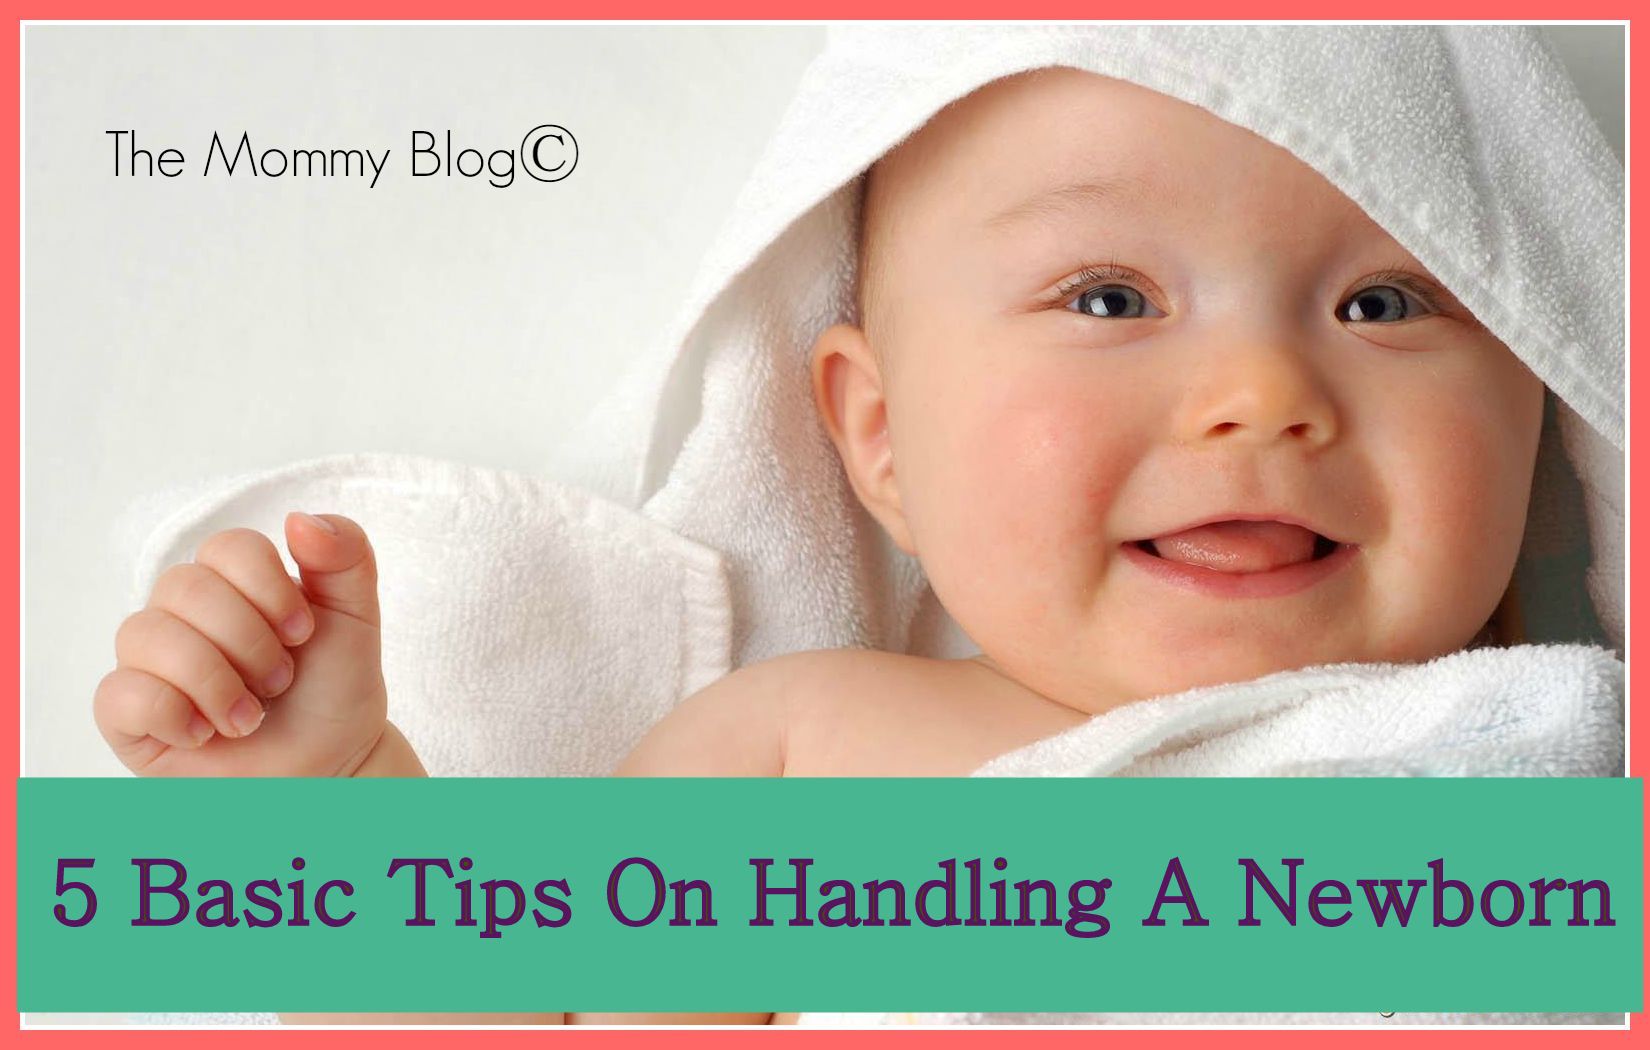 Tips on handling a newborn the mommy blog india